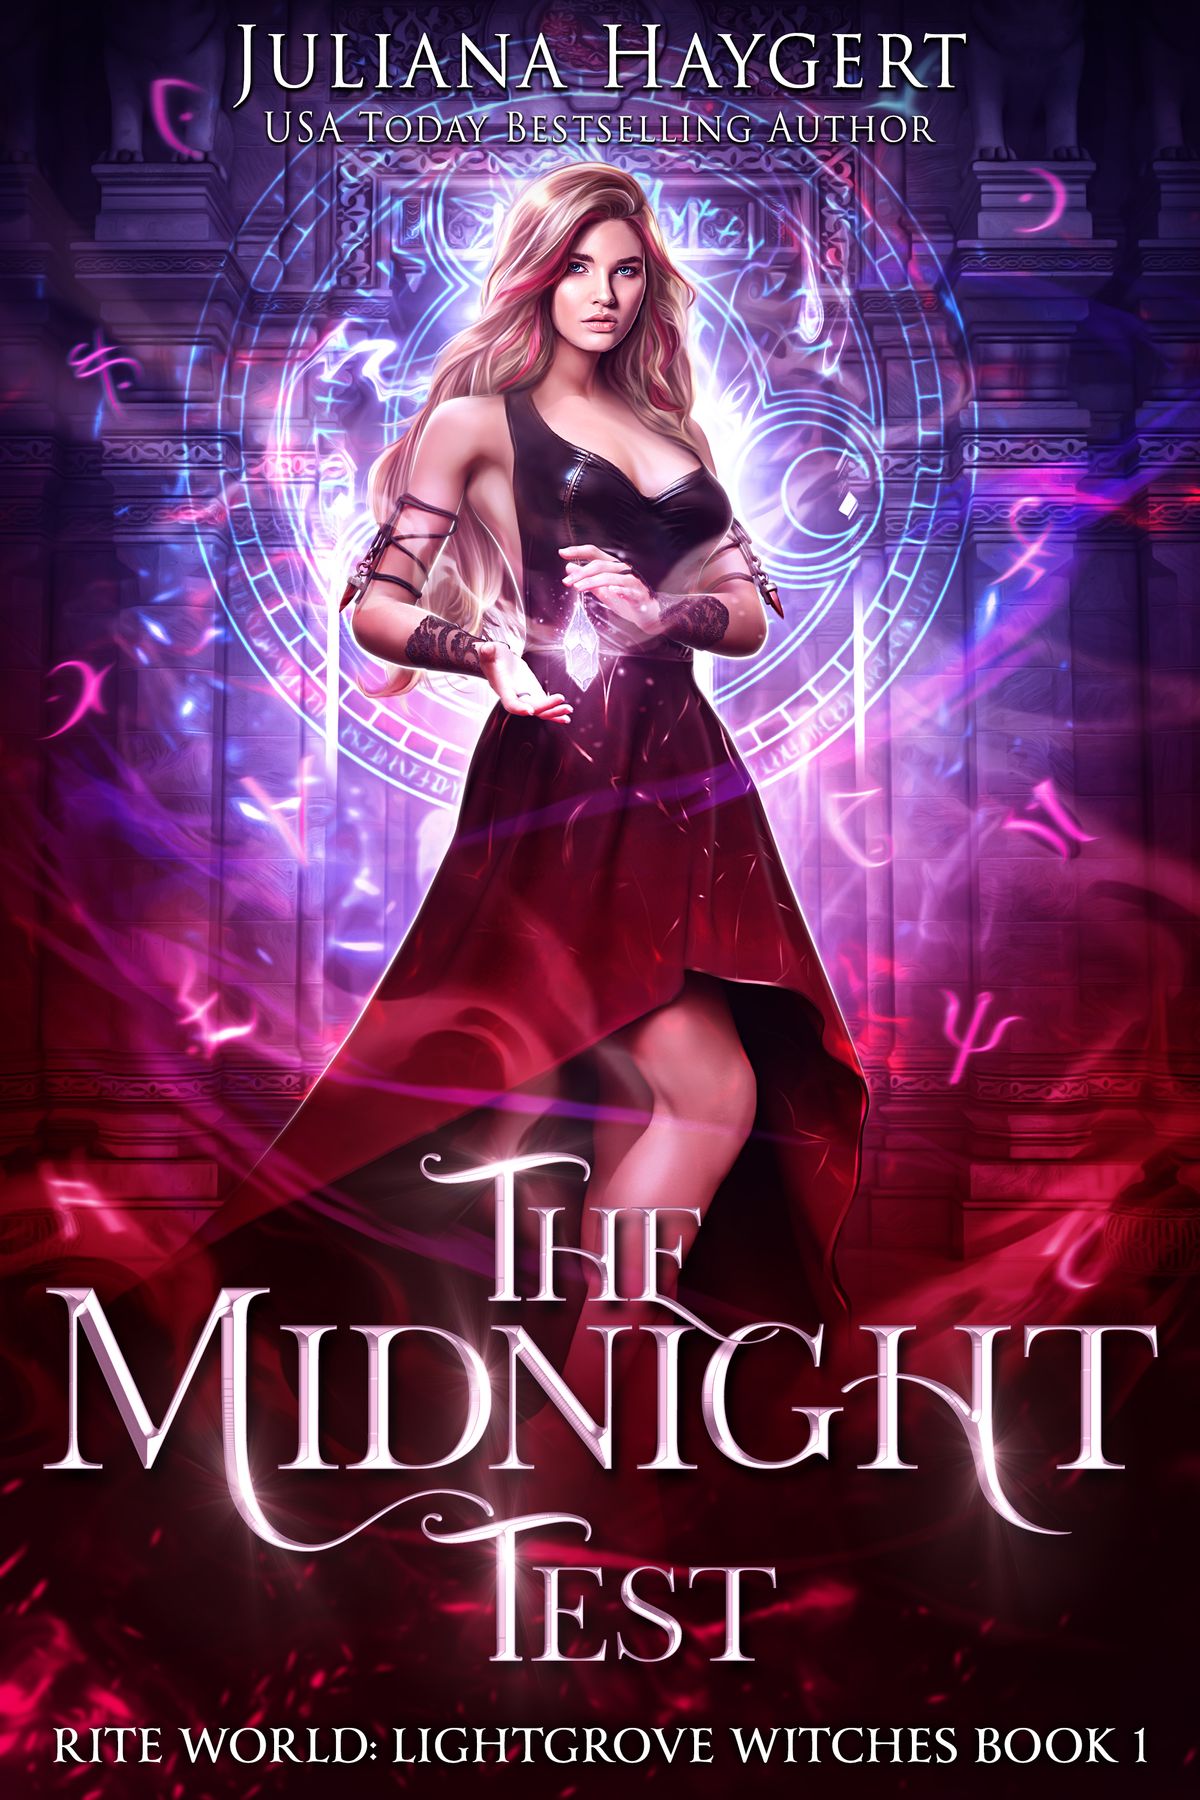 You are currently viewing The Midnight Test (Rite World: Lightgrove Witches Book 1) – Juliana Haygert